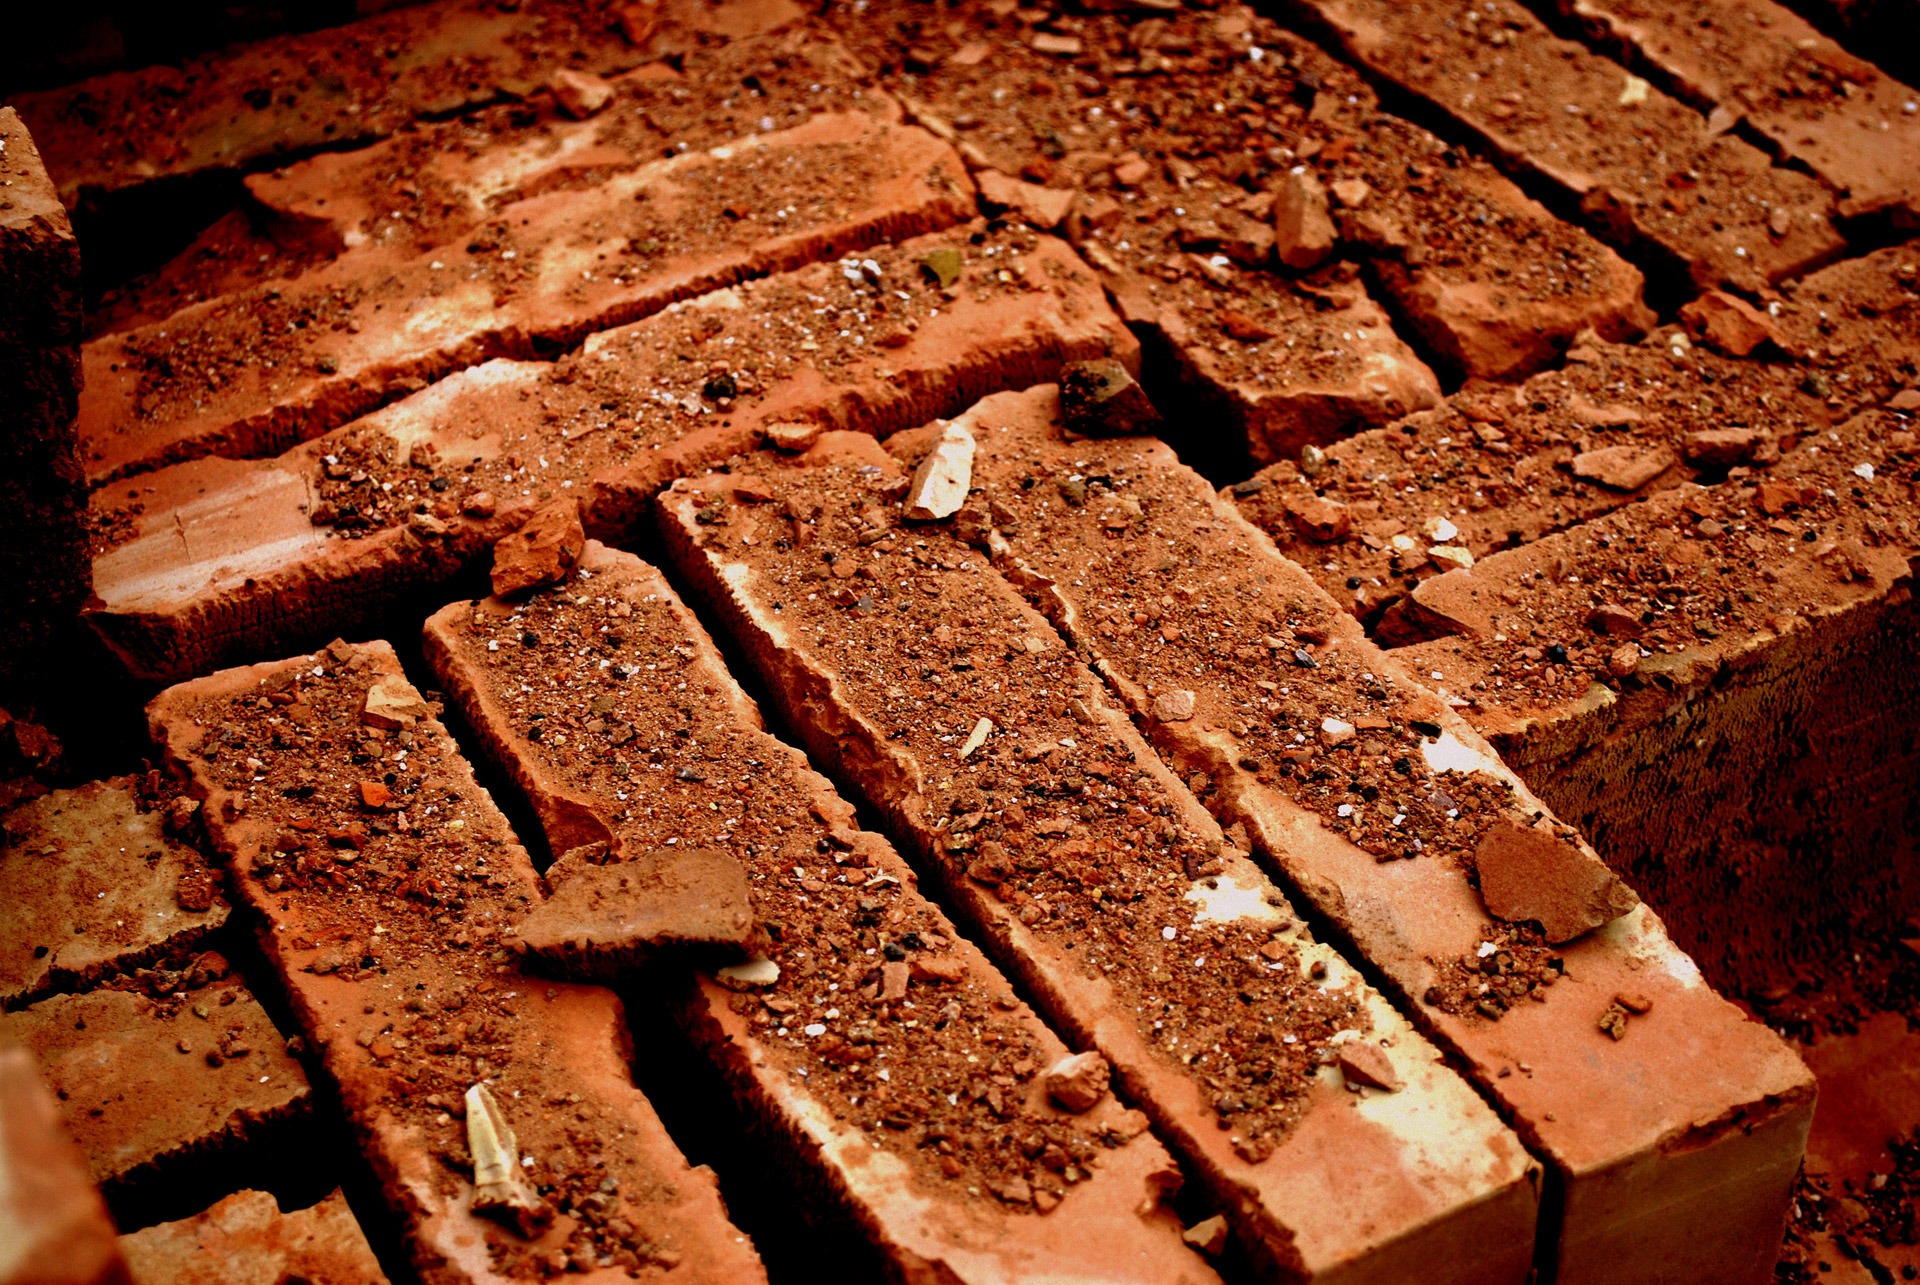 A pile of worn bricks covered in dust and chips of other bricks. 